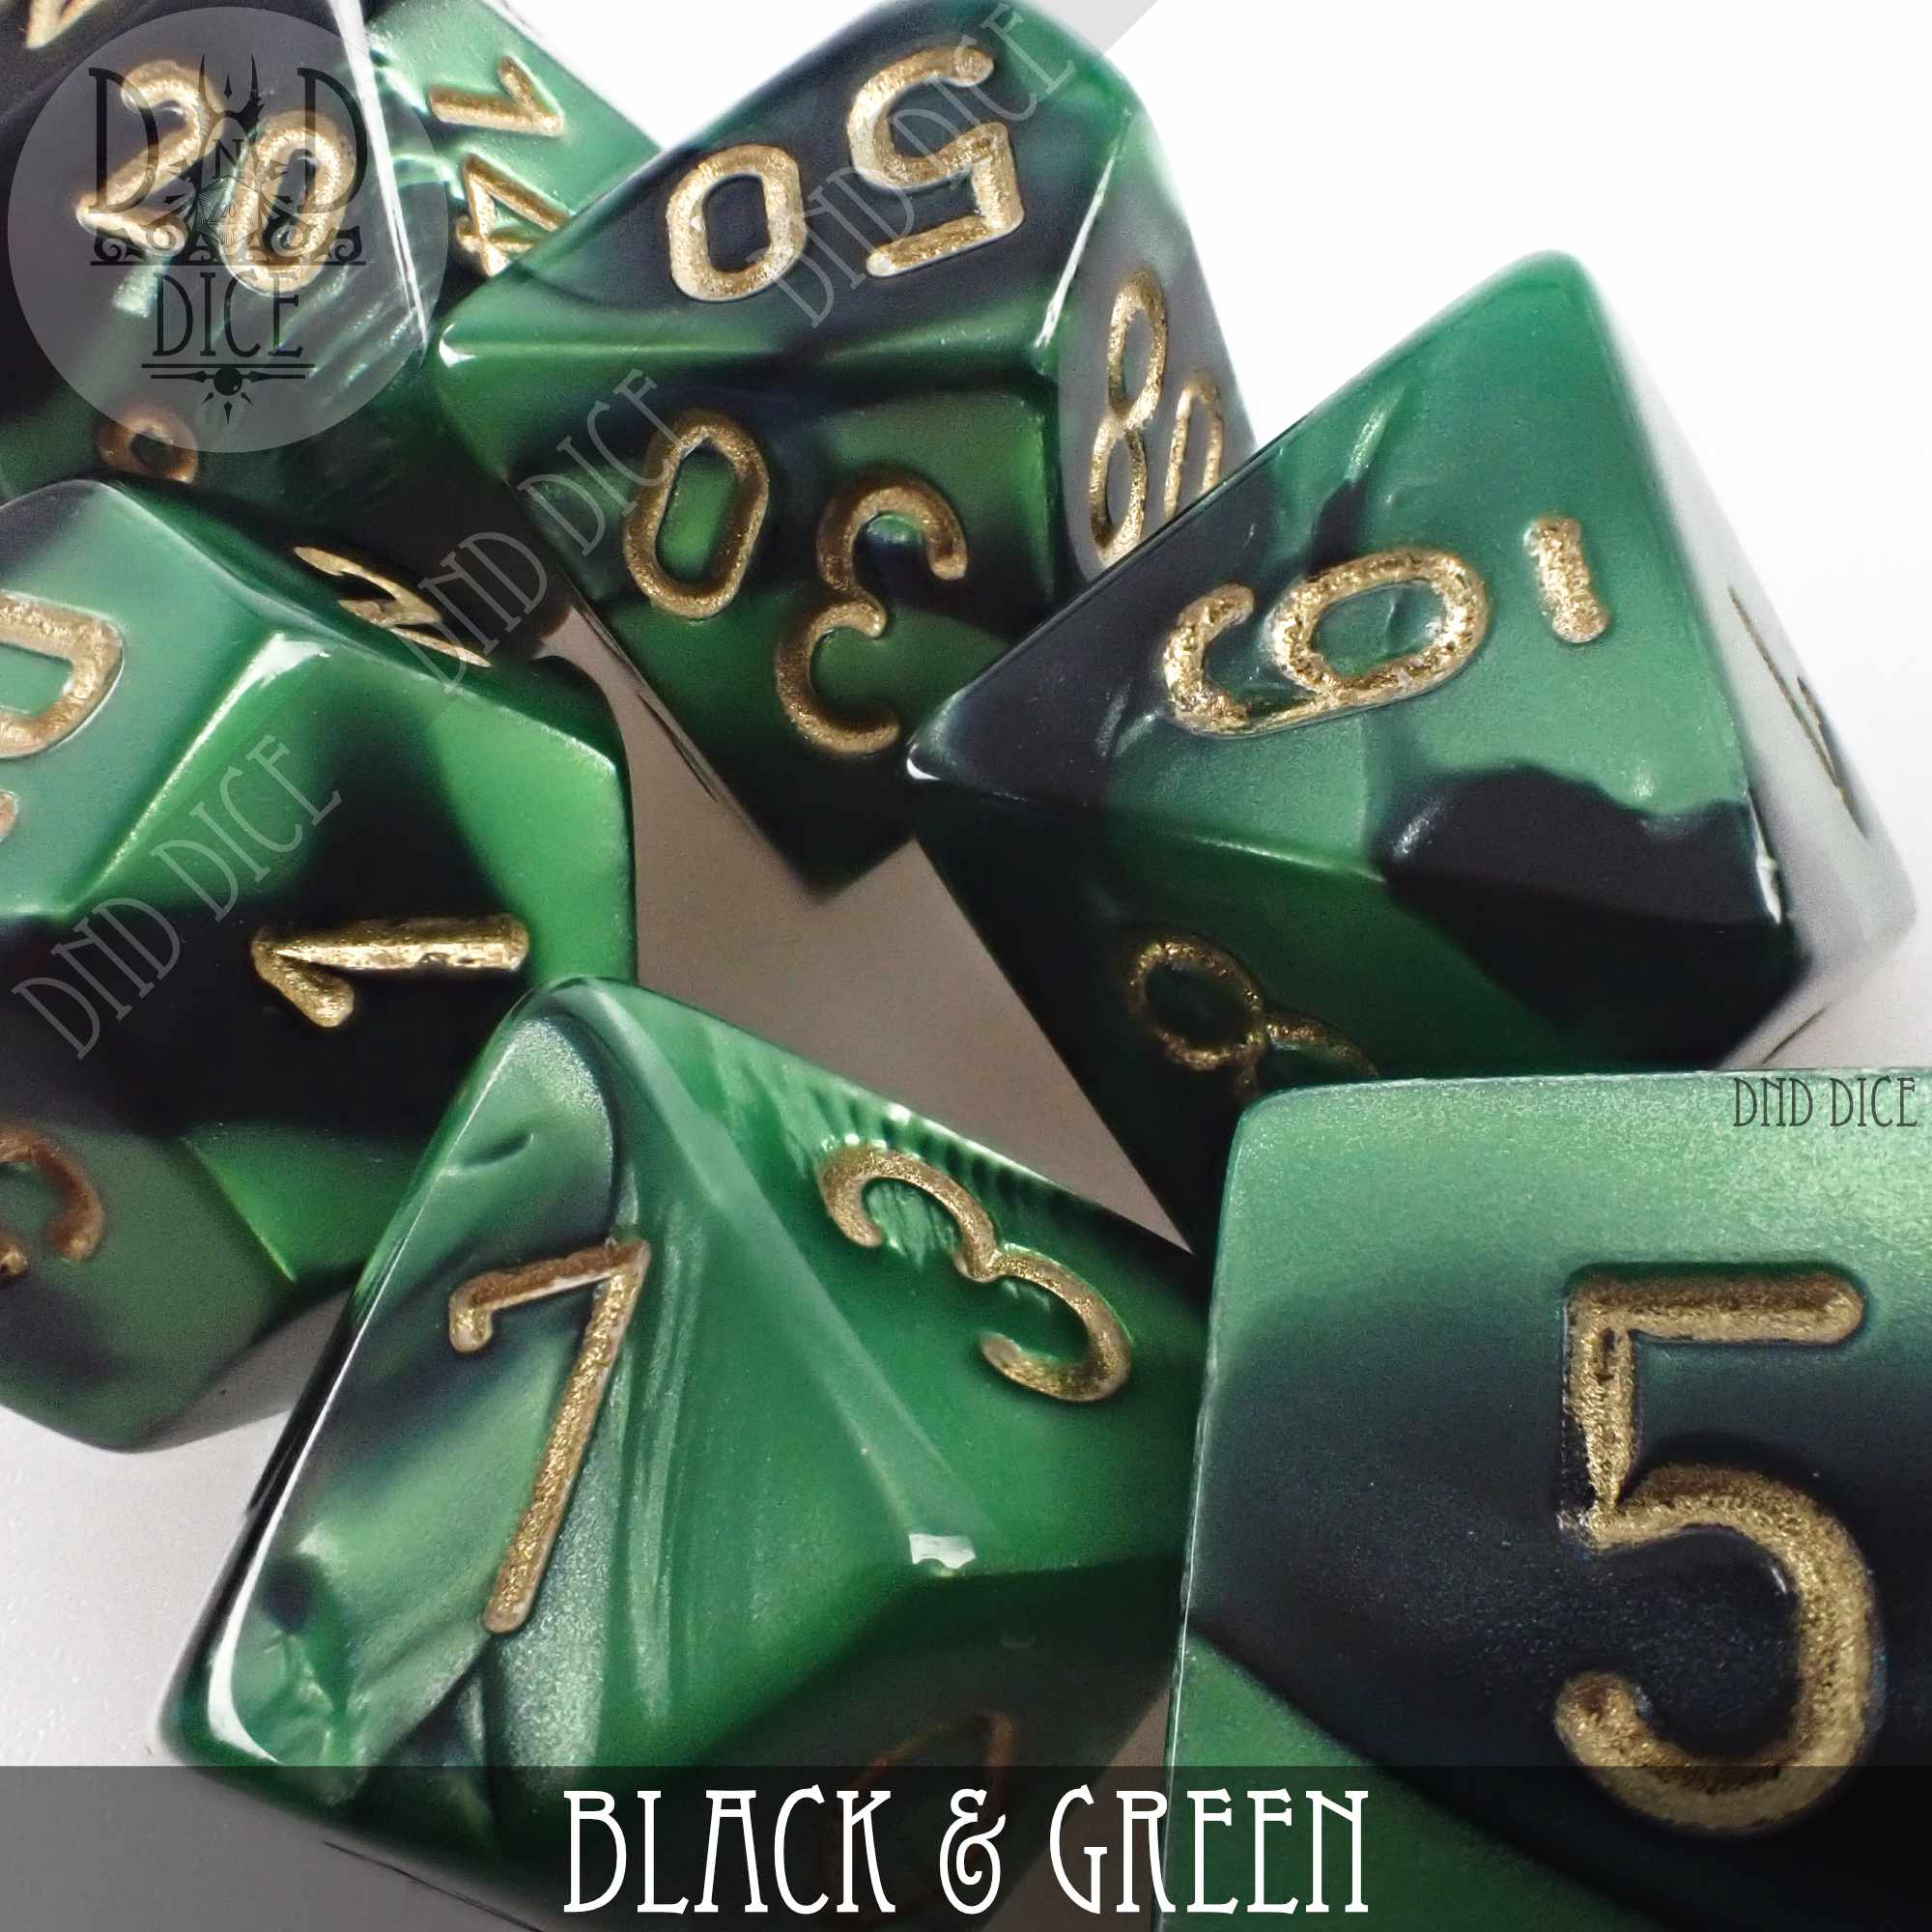 Black & Green Build Your Own Set